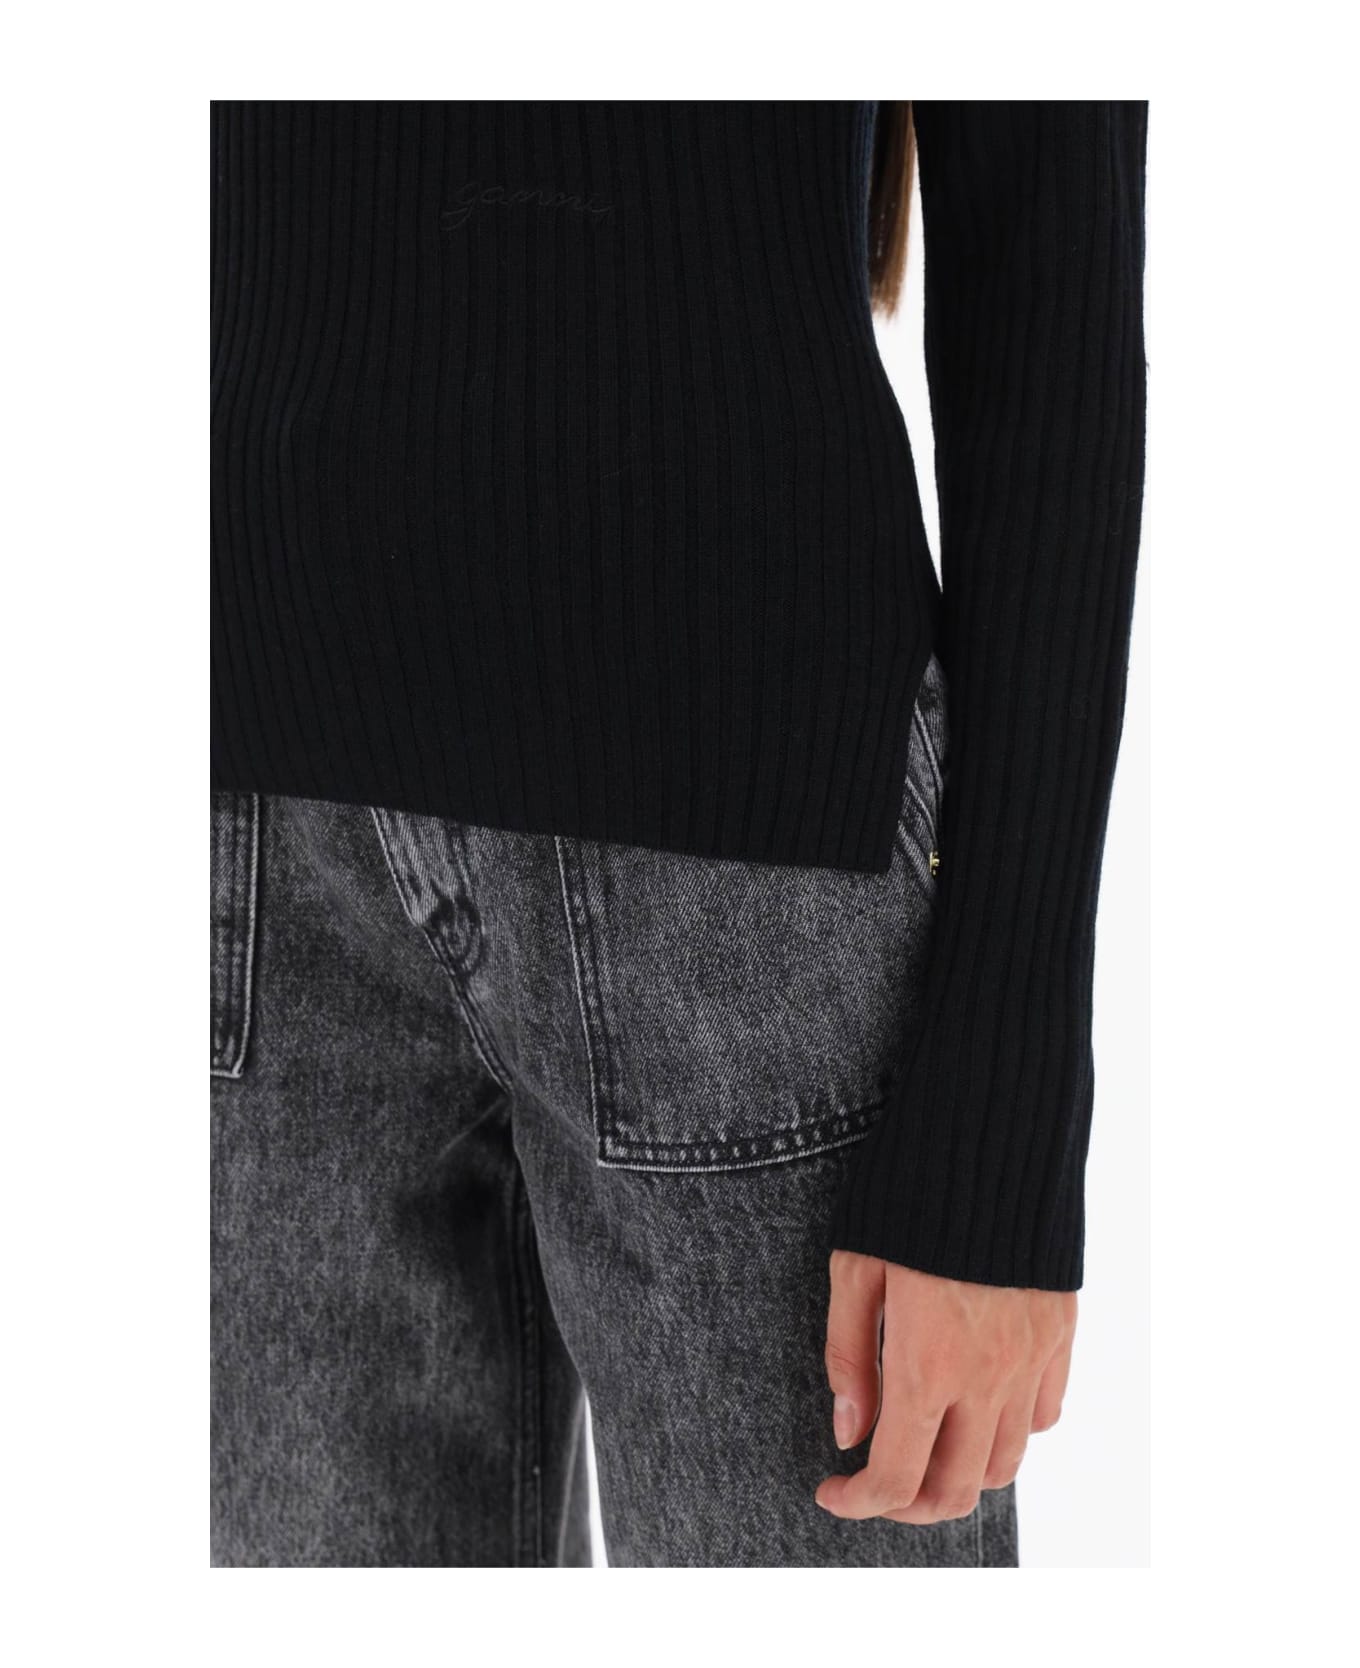 Ganni Turtleneck Sweater With Back Cut Out - BLACK